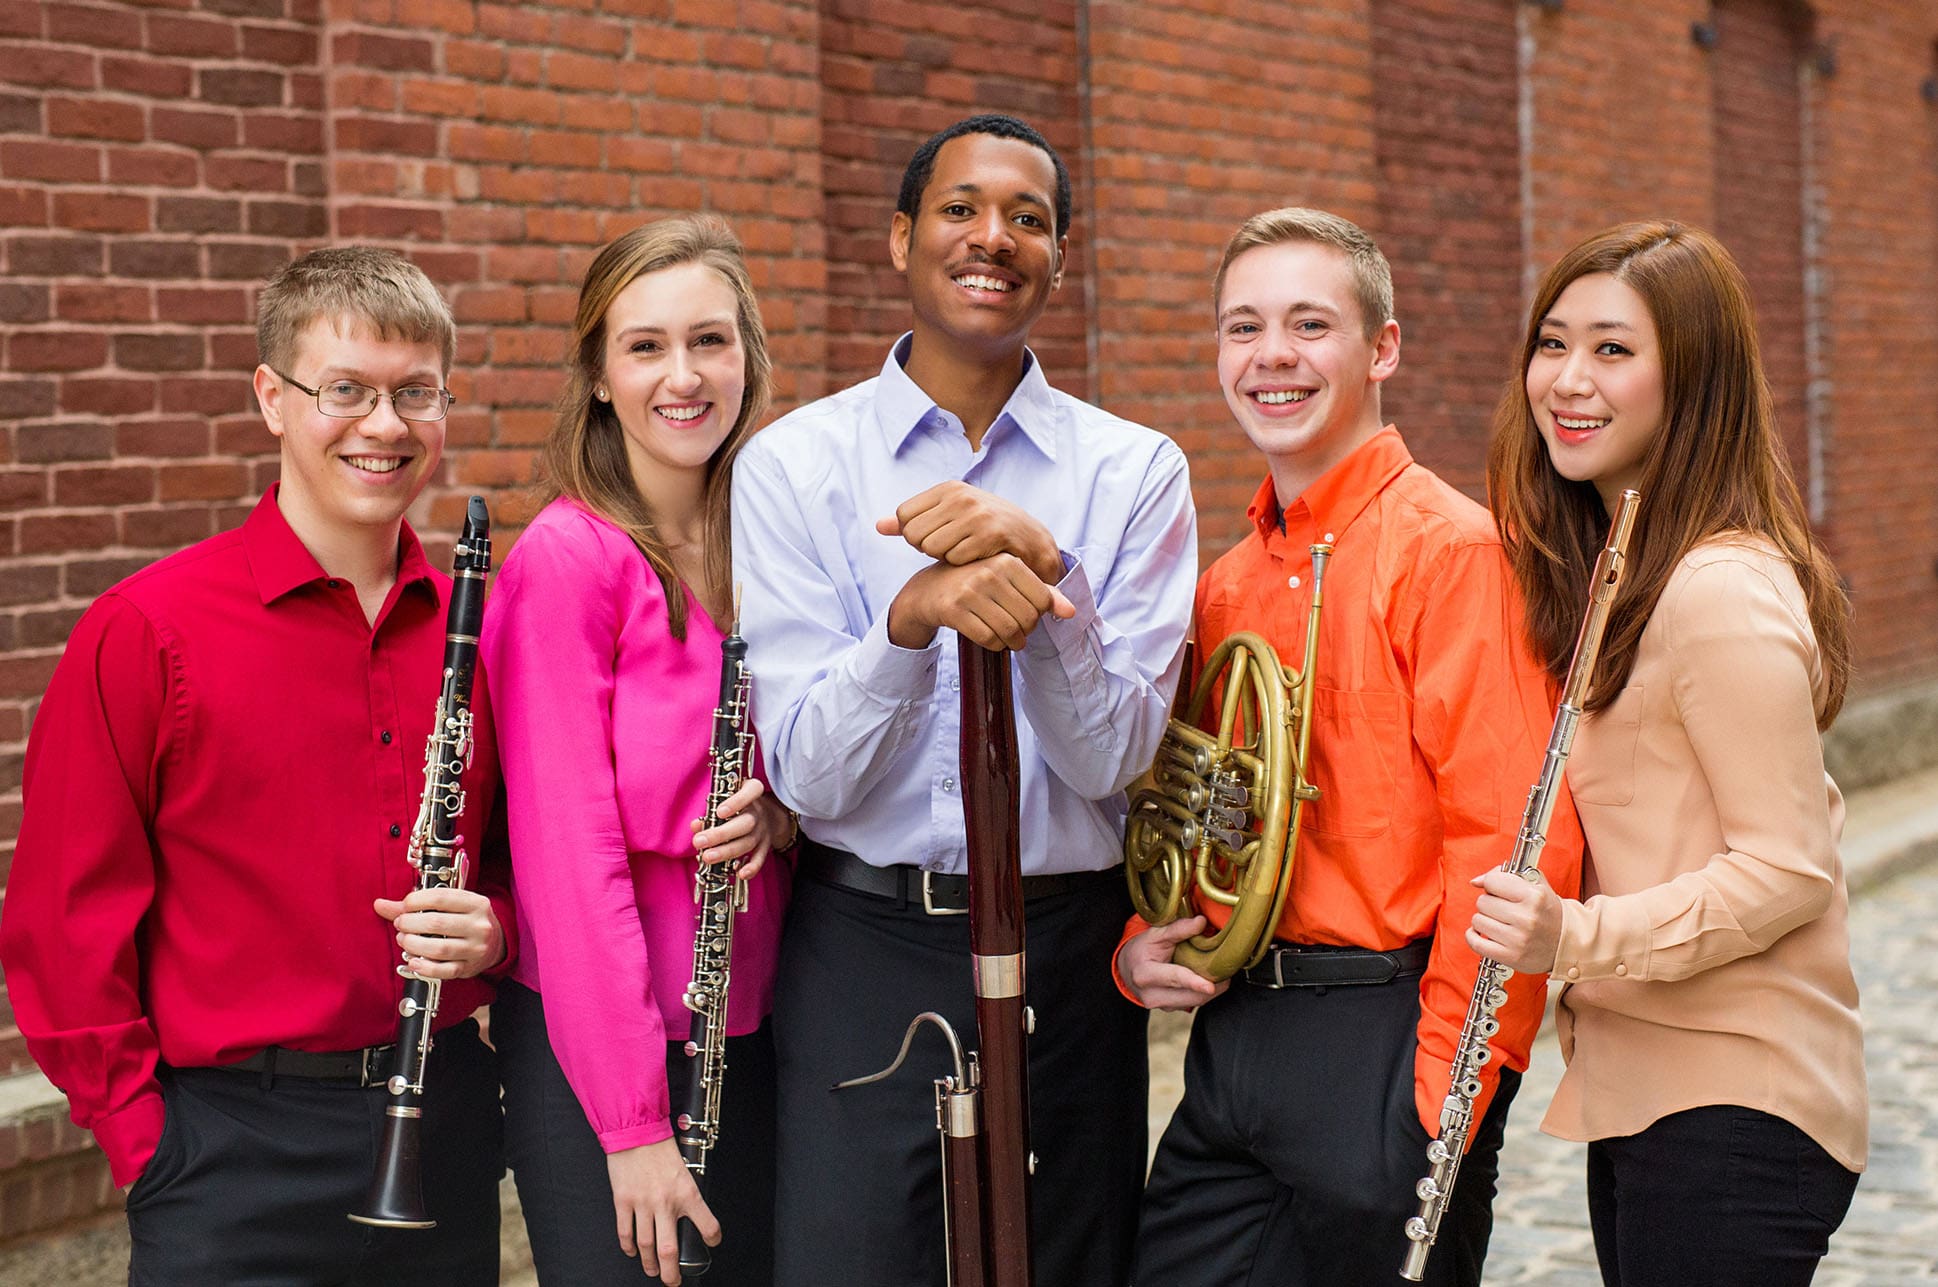 Five students standing together holding instruments.